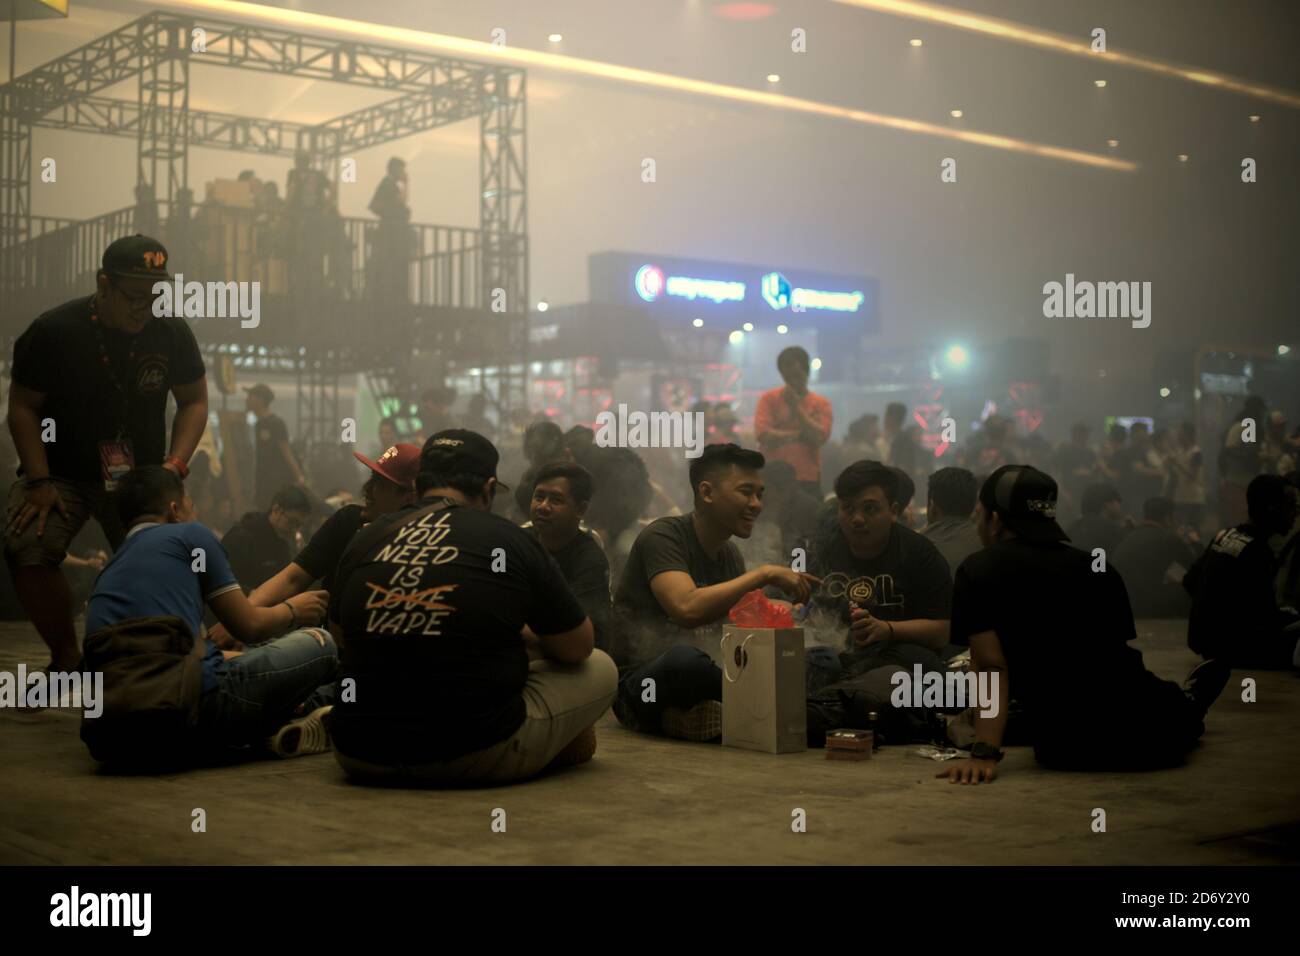 Some groups of visitors getting a rest while the others are participating in quiz and games at main stage area during the annual Vape Fair in Jakarta, Indonesia. Stock Photo